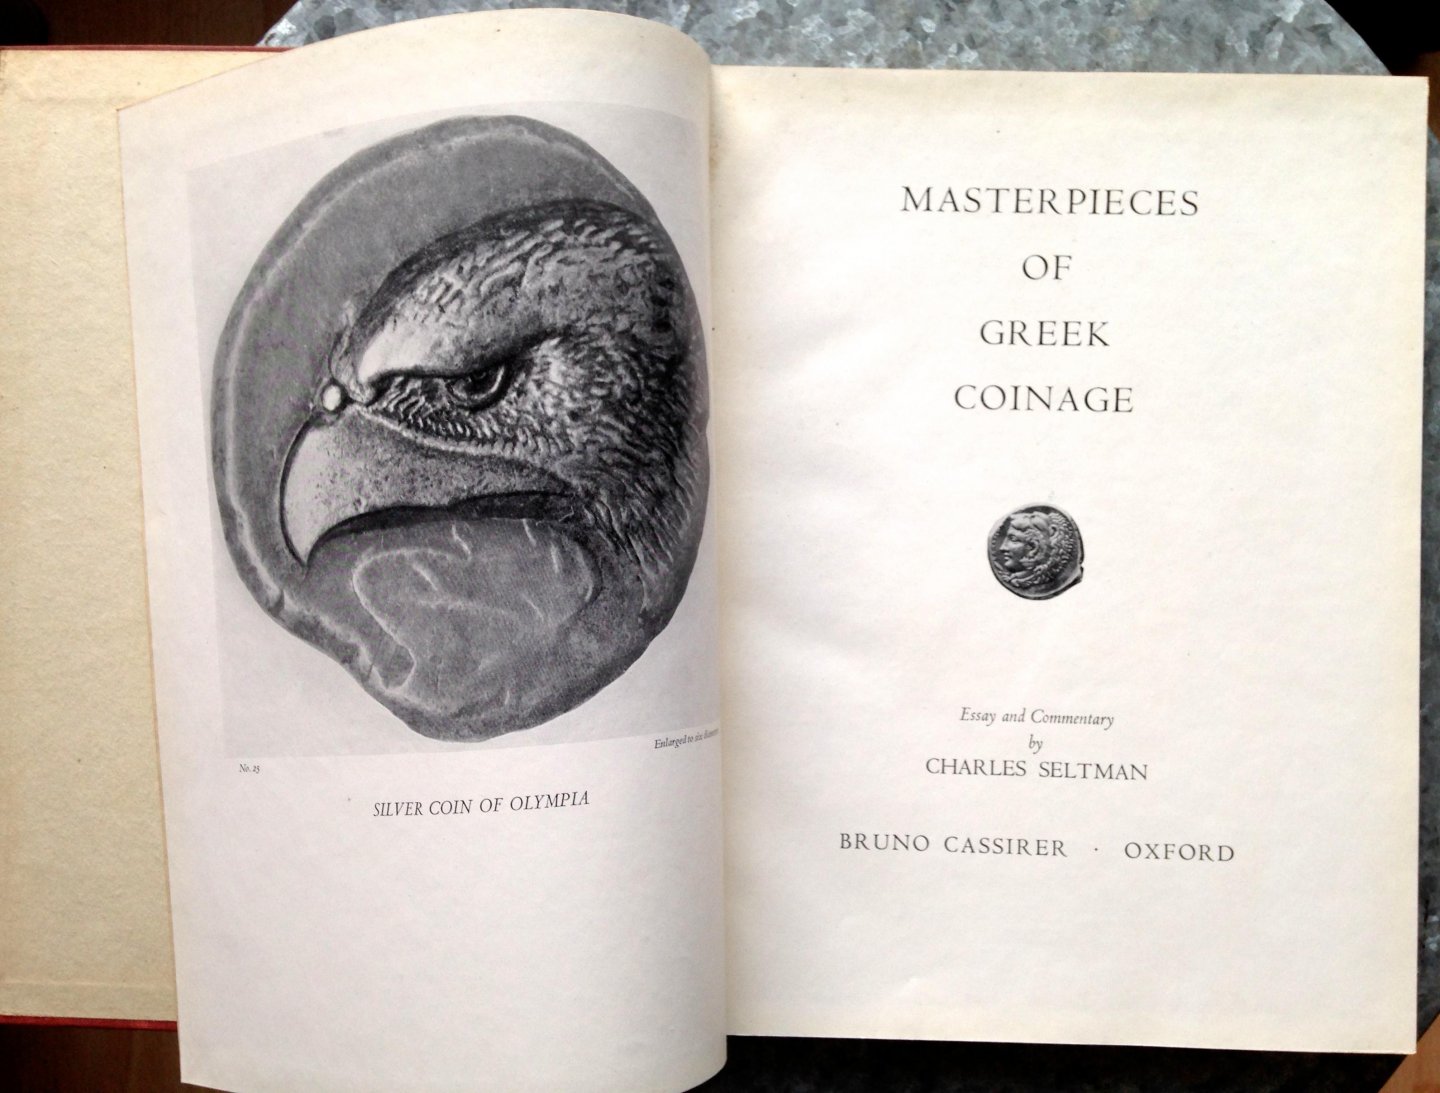 Seltman, Charles - Masterpieces of Greek Coinage